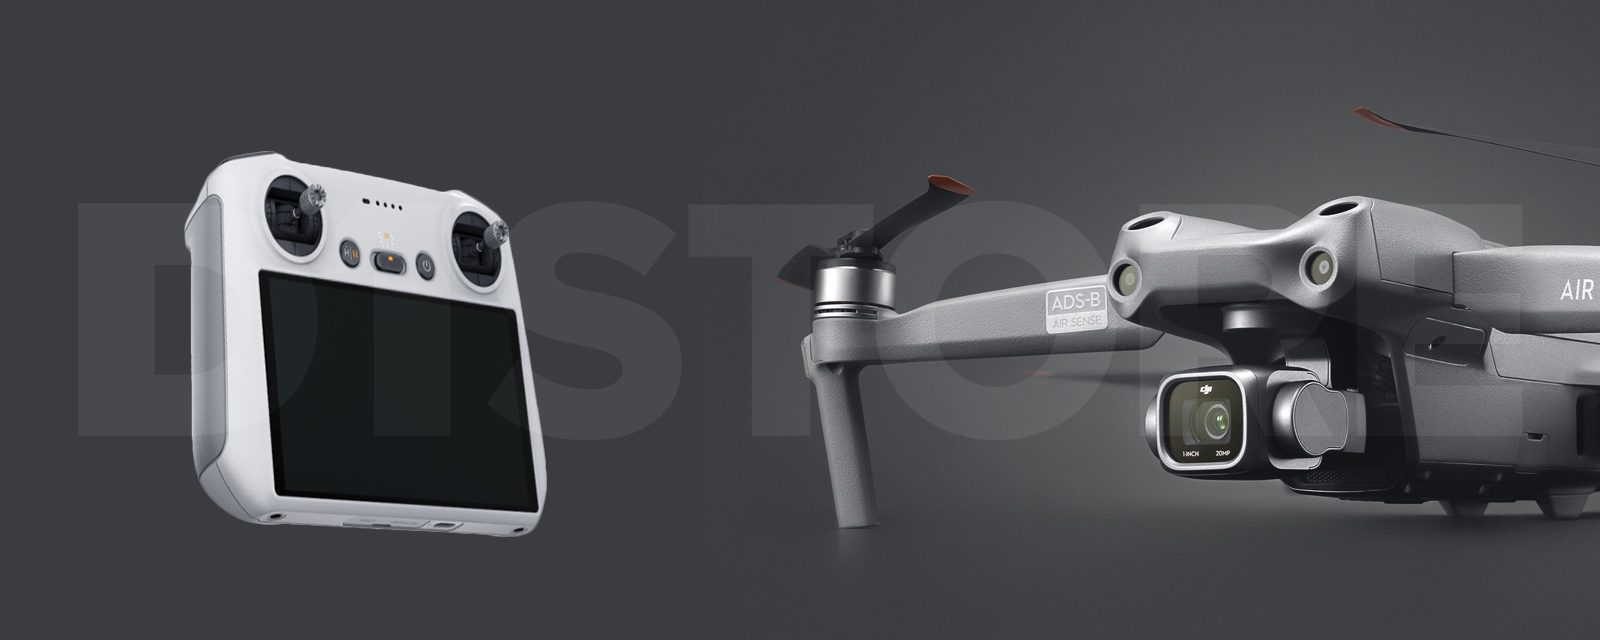 DJI RC Now Compatible With DJI Air 2S | D1 Lounge